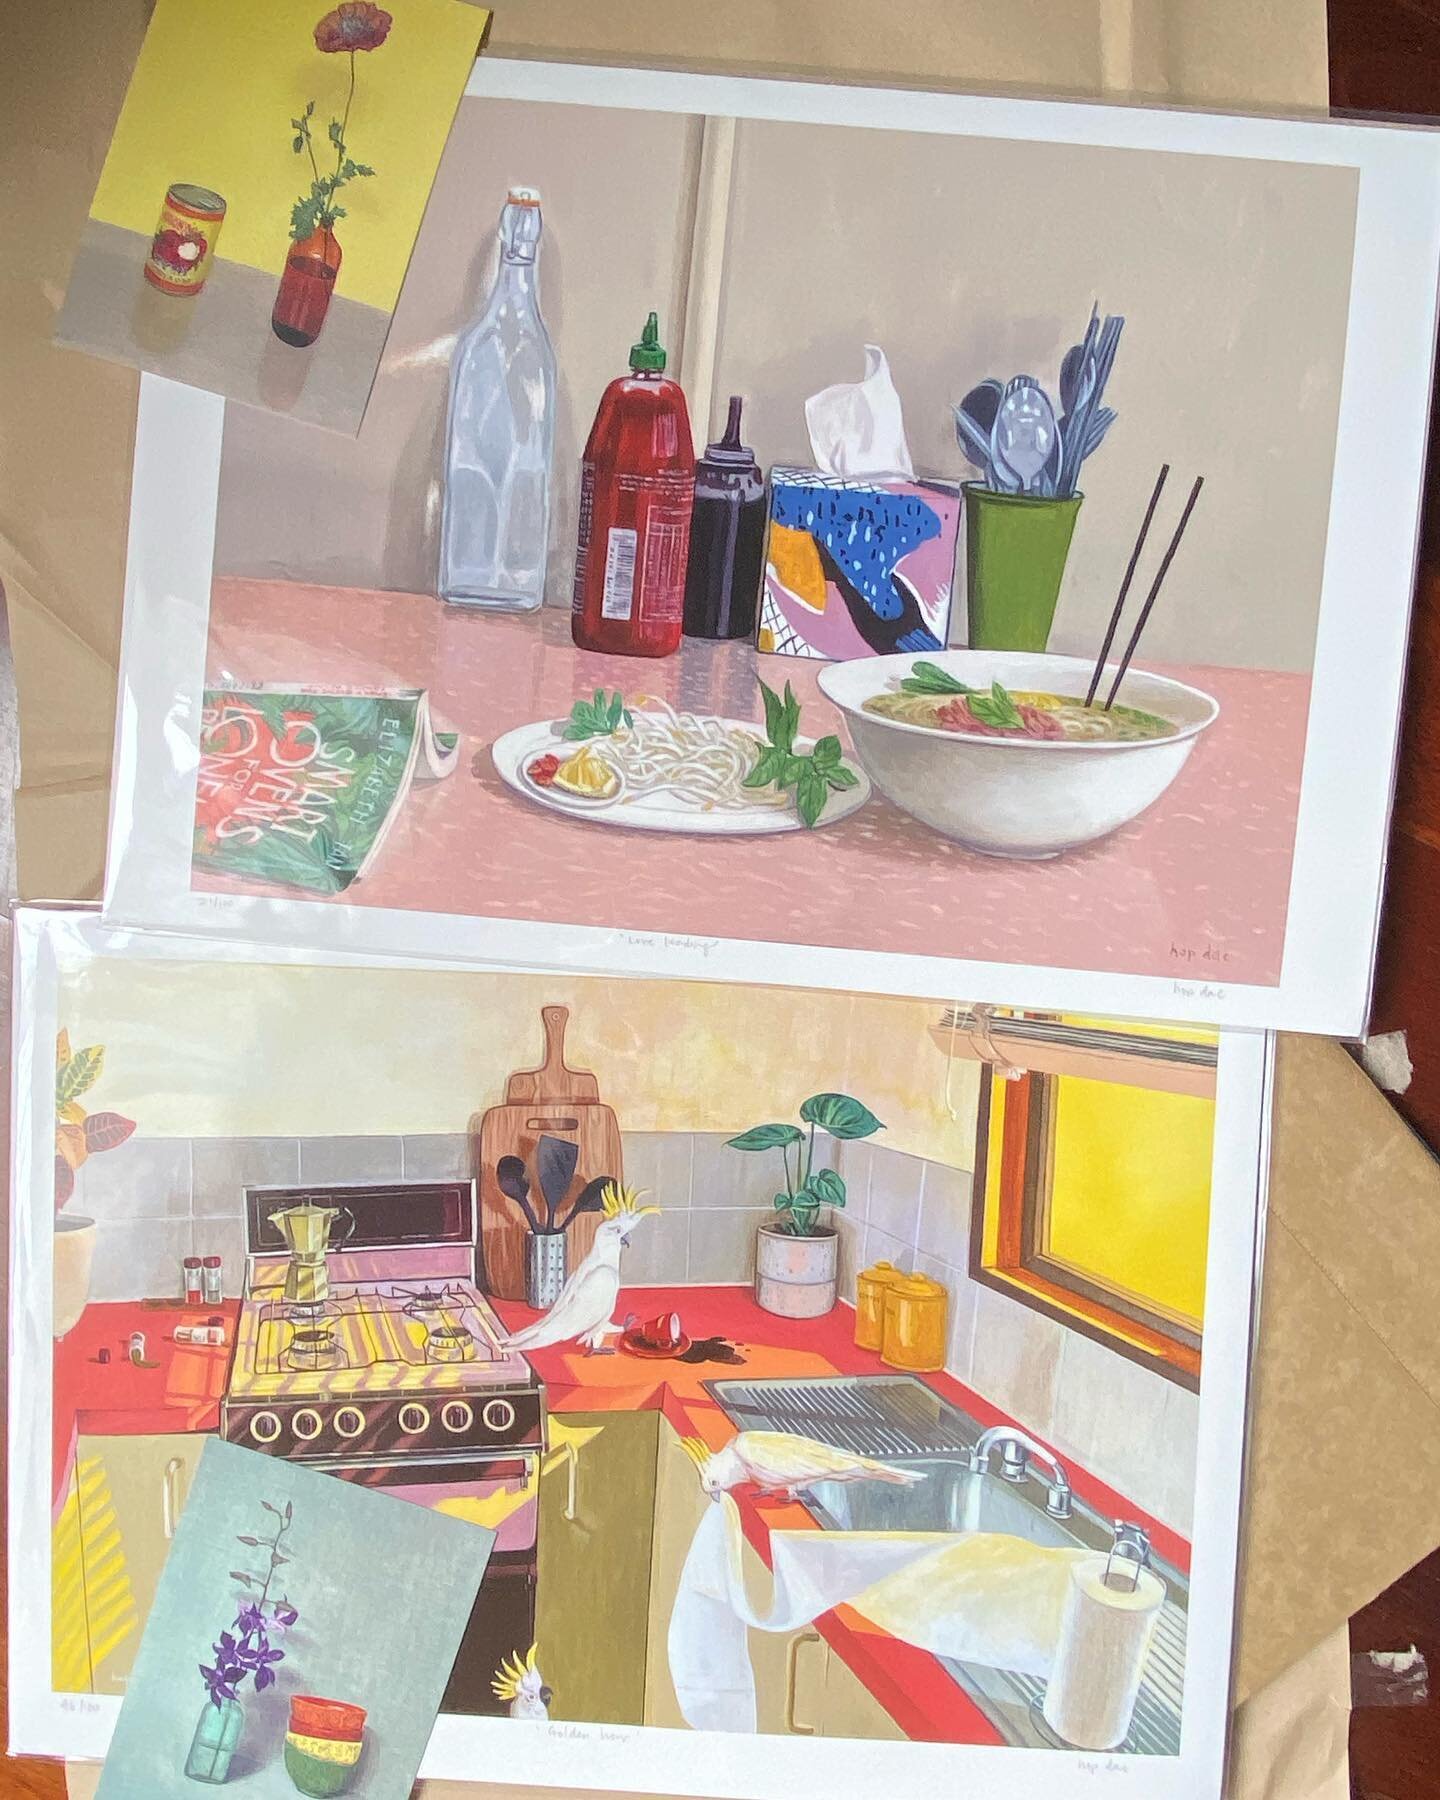 Australiana, but make it Vietnamese diaspora 🍜 I ordered these gorgeous limited edition prints from the Geelong artist @hop.dac.art Thank you for including the little postcards.

An image of phở brings memories. As a little girl I used to eat it wit